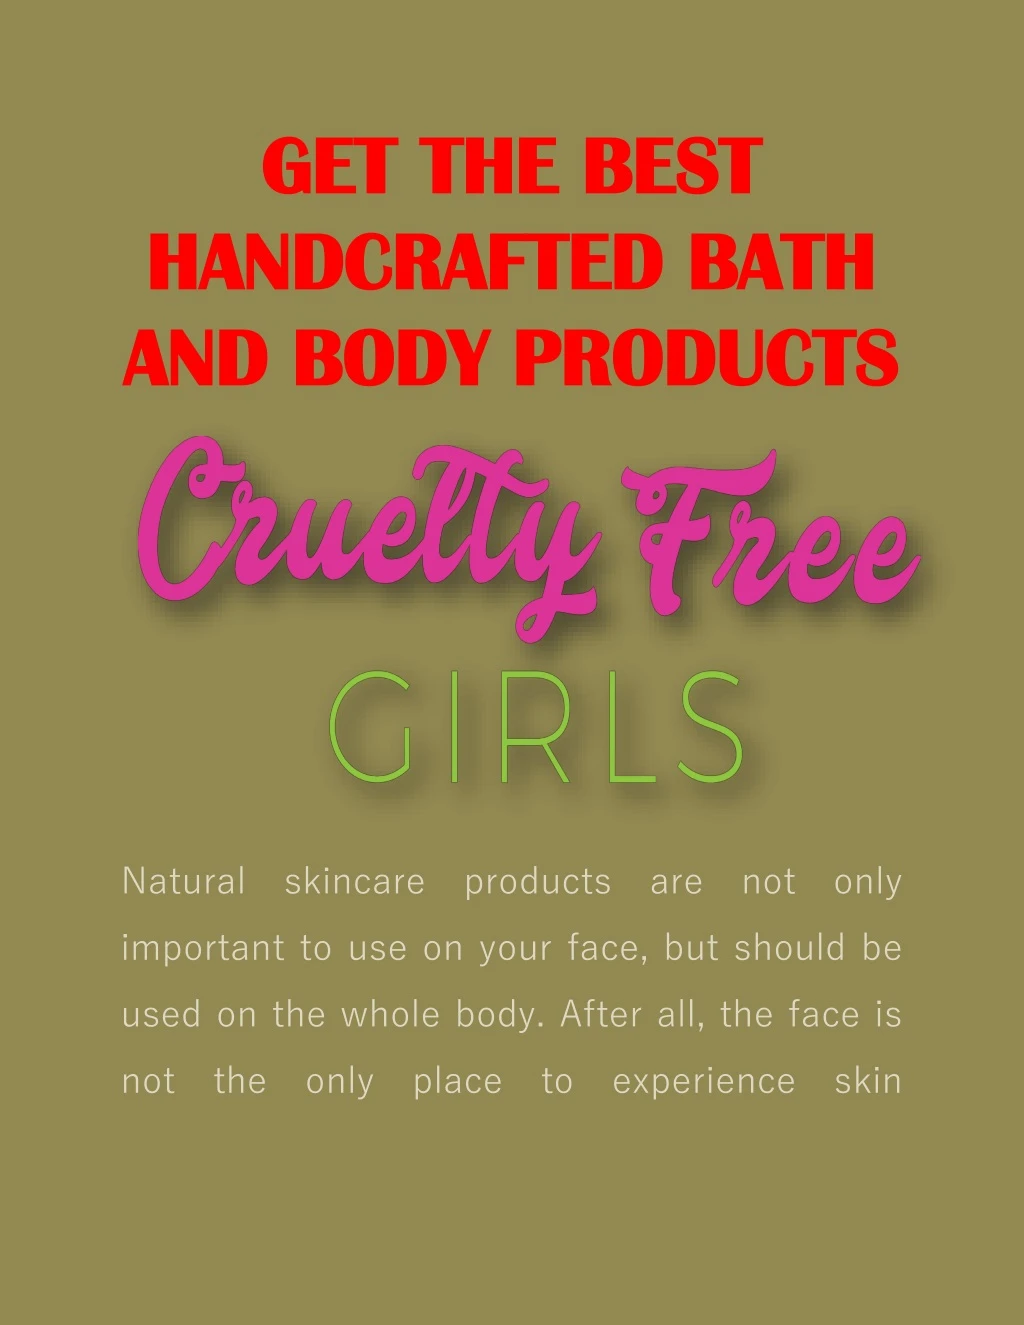 get the best get the best handcrafted bath